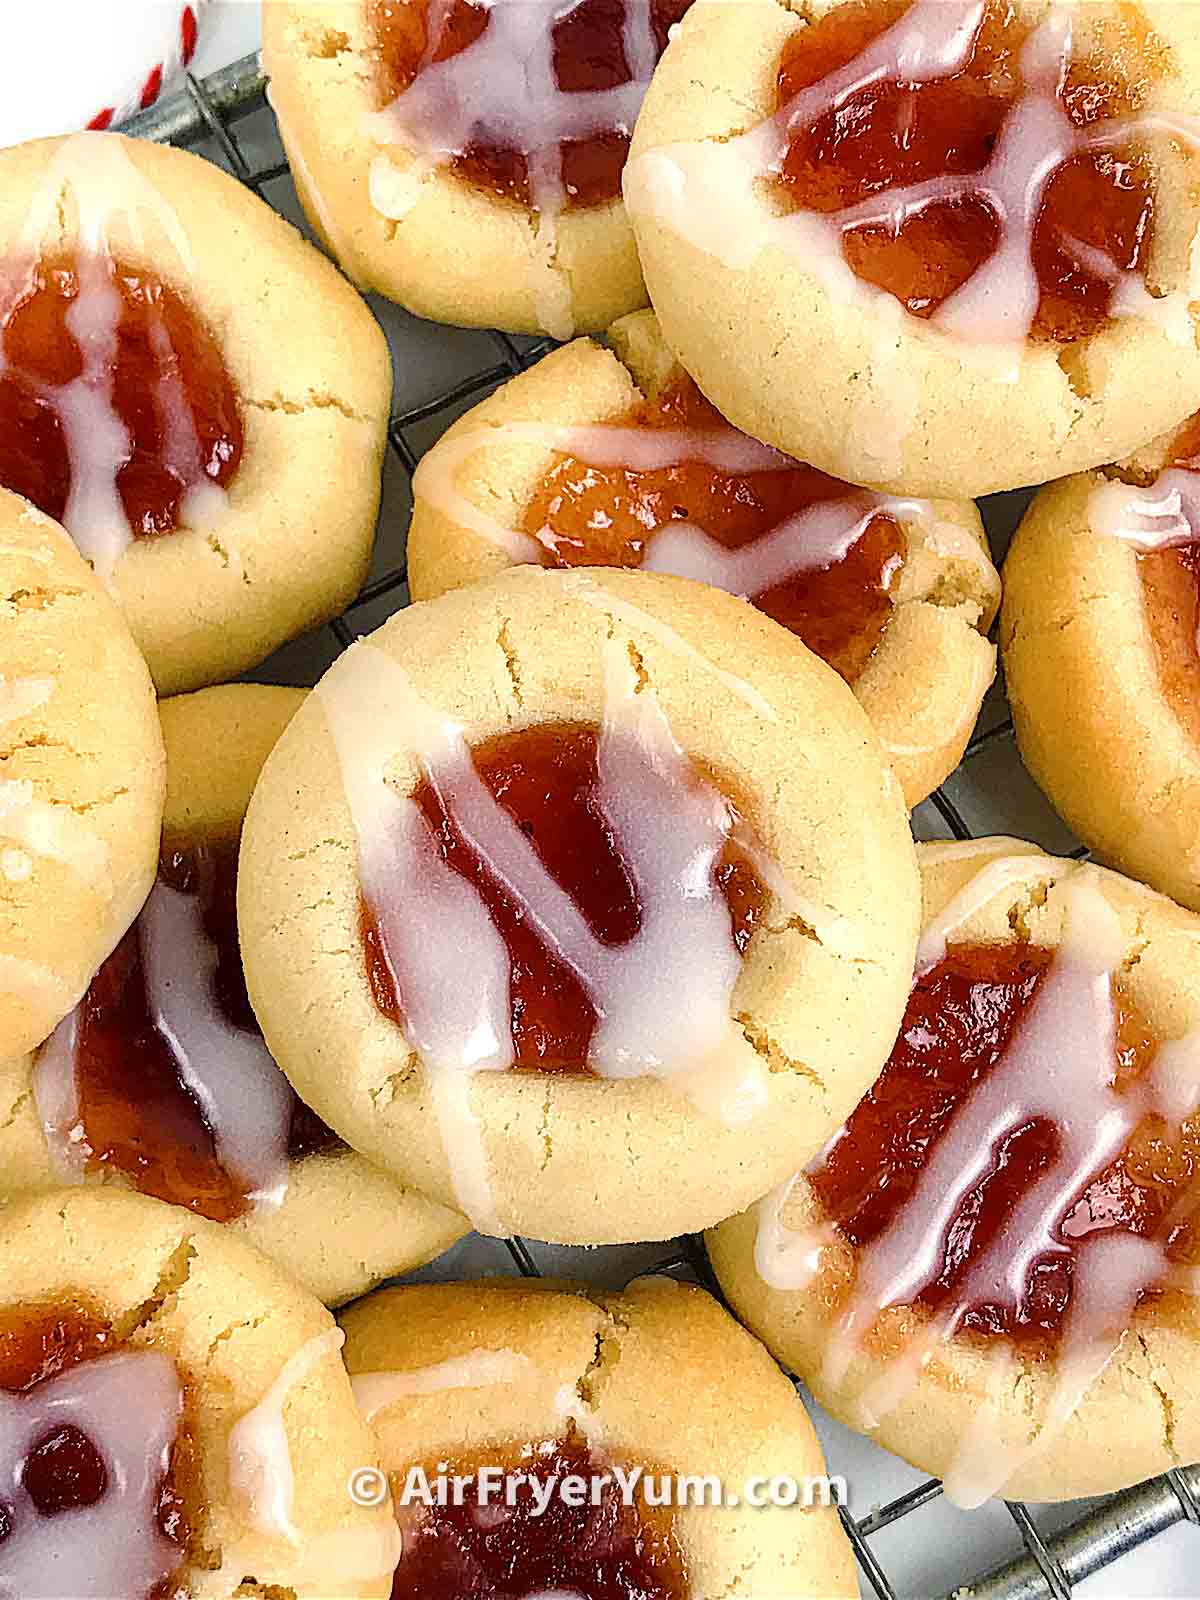 Top view of a collection of jam filled cookies topped with glaze